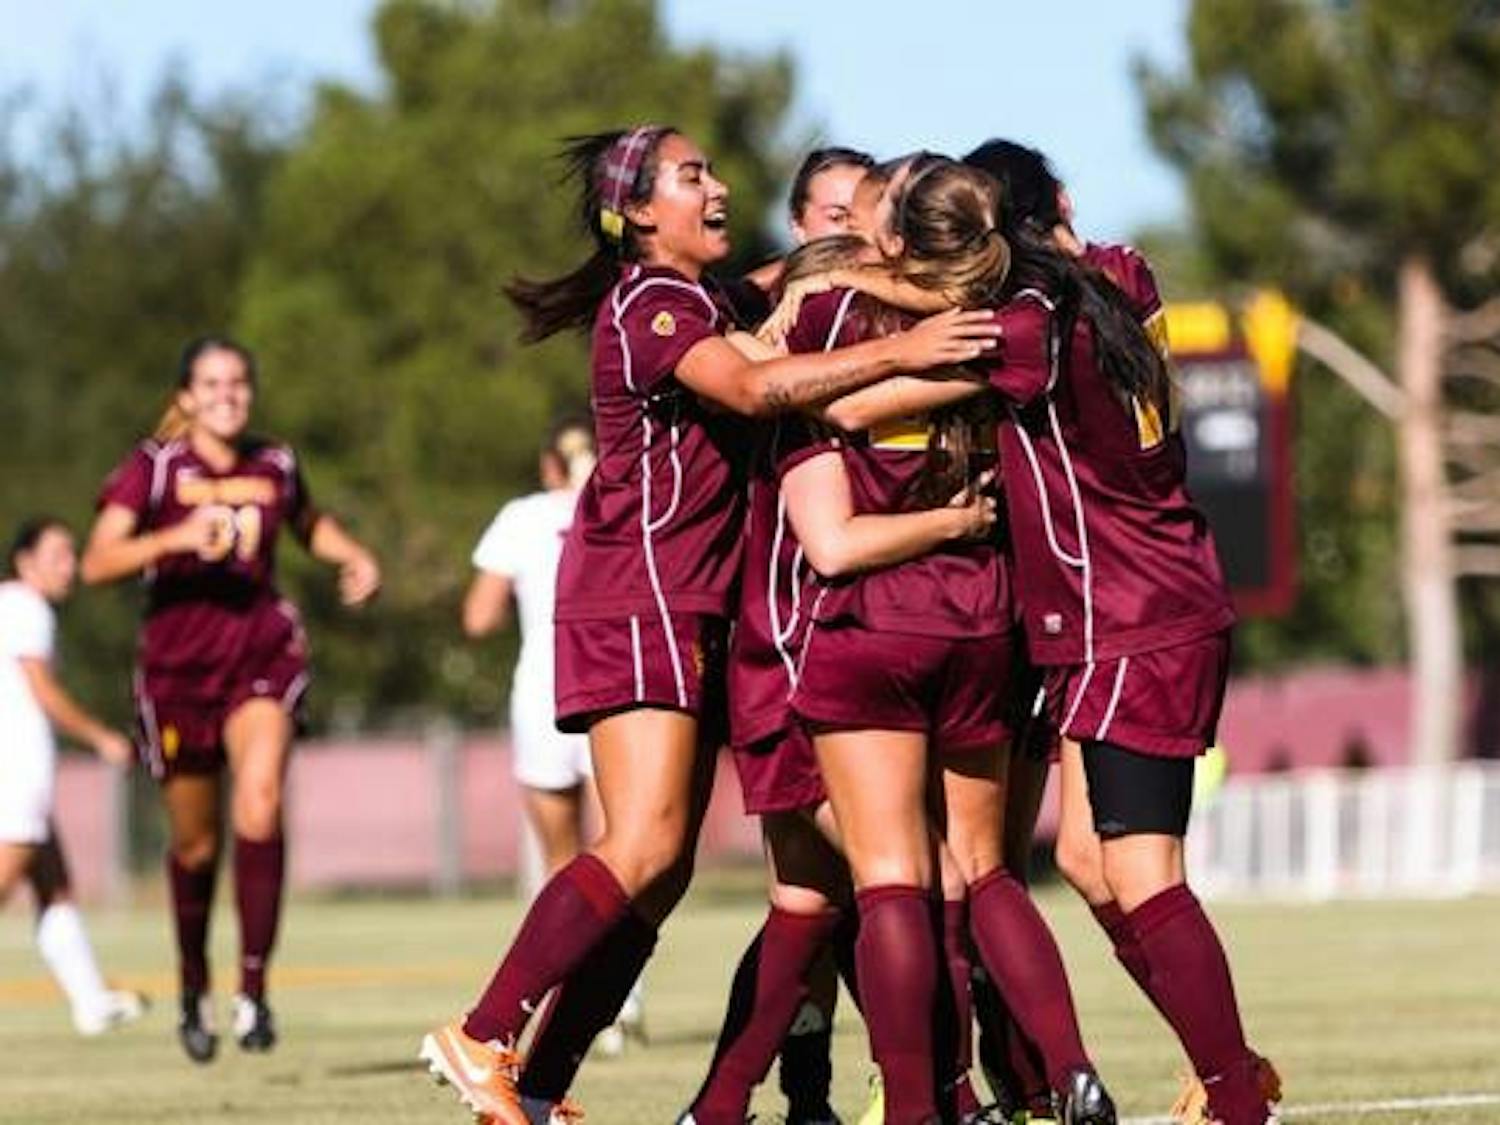 Members of the ASU women's soccer team celebrate a 1-0 win over UA that ultimately clinched the Sun Devils a playoff spot. (Photo by Daniel Kwon)